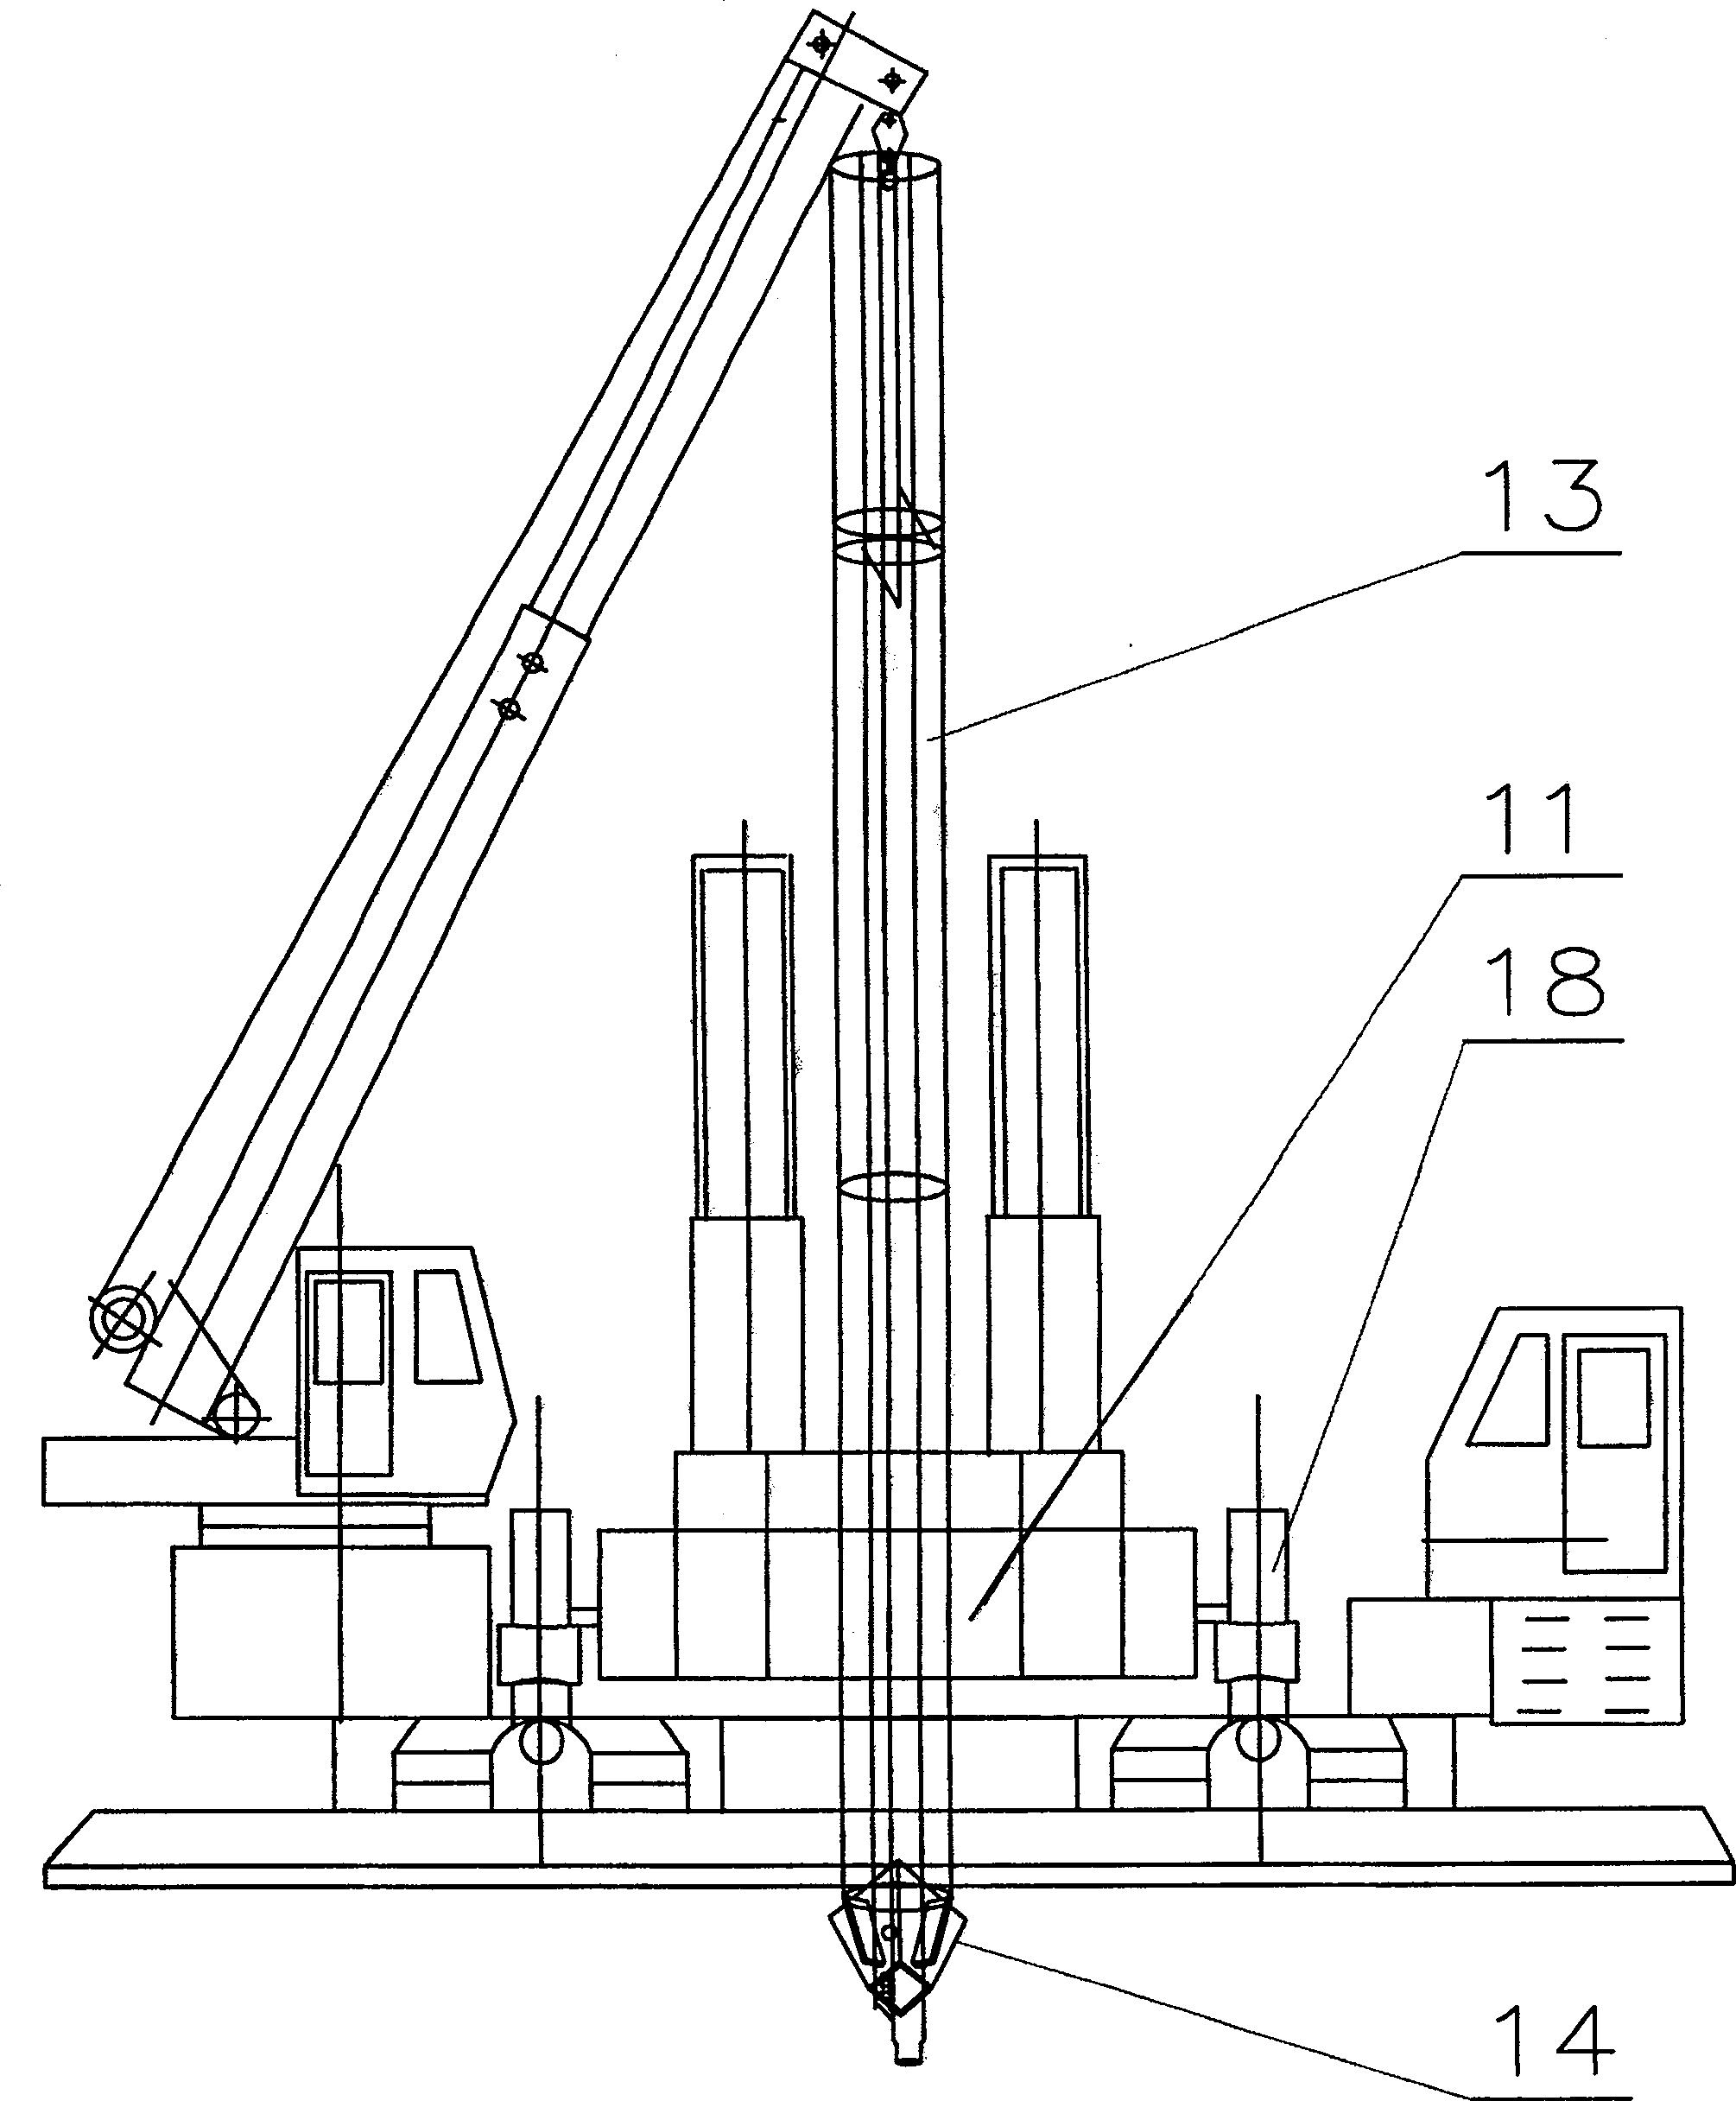 Construction technique for holding type PHC tube pile with tip entering into rock by augering technique